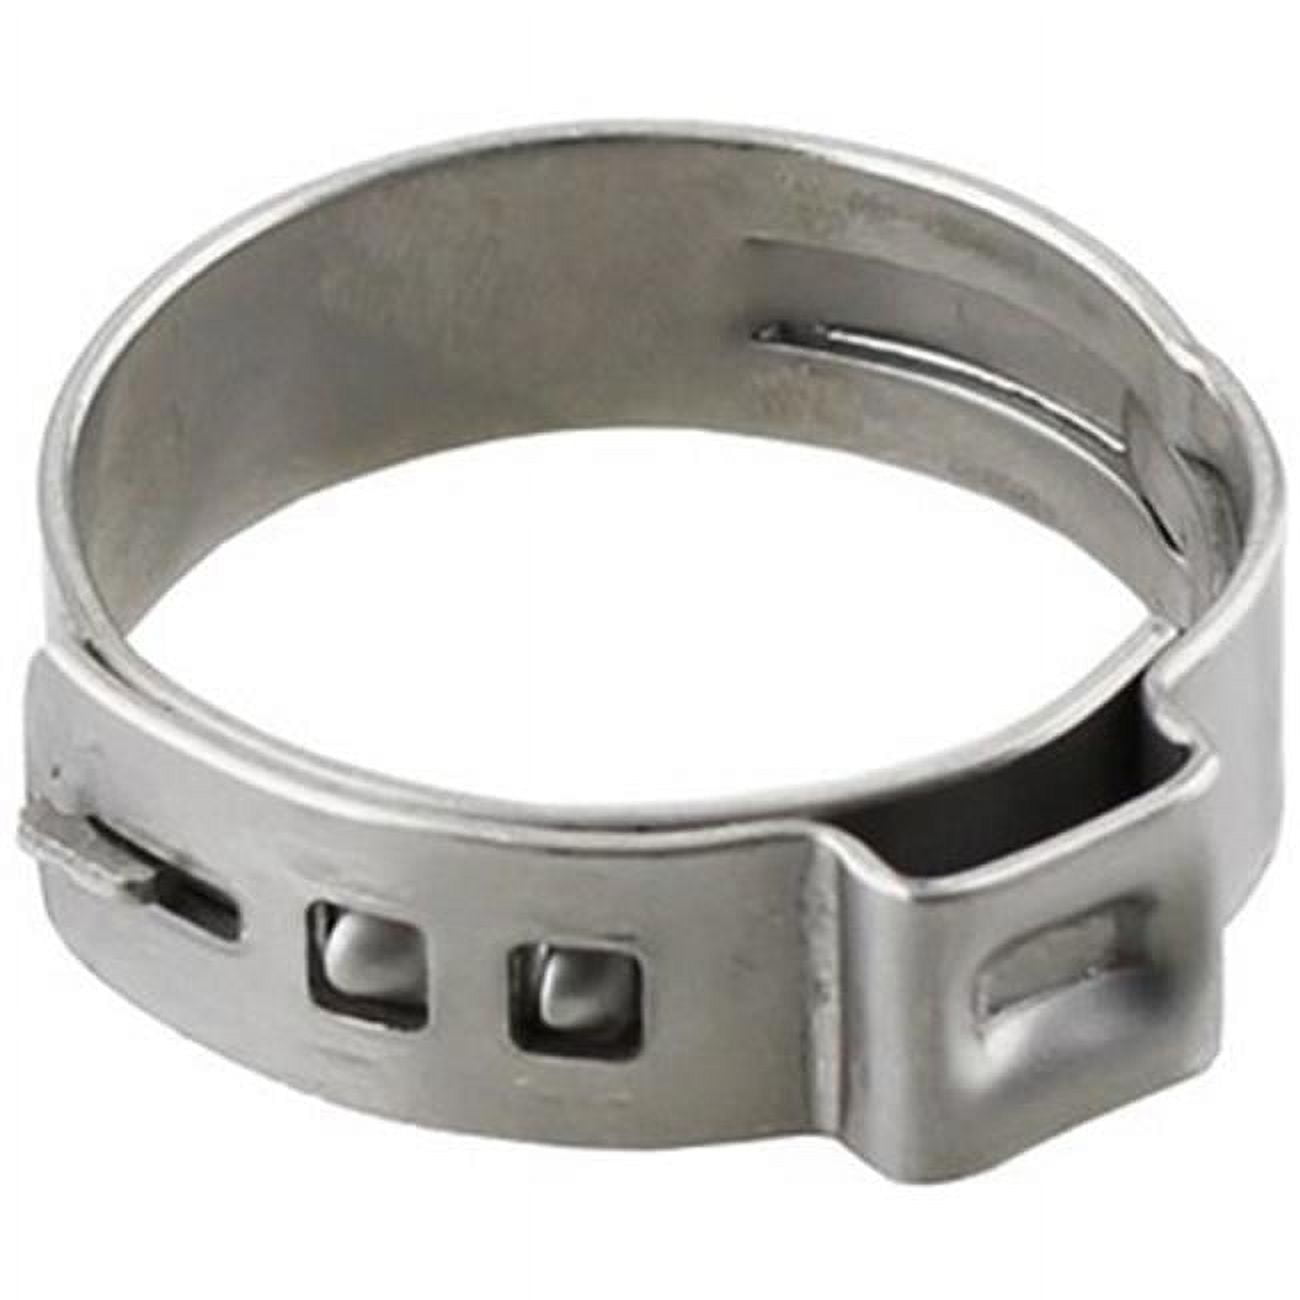 Picture of Boshart & Plumbeeze PE-PS-PC05-10 0.5 in. Stainless Steel PEX Pinch Clamp - Pack of 10